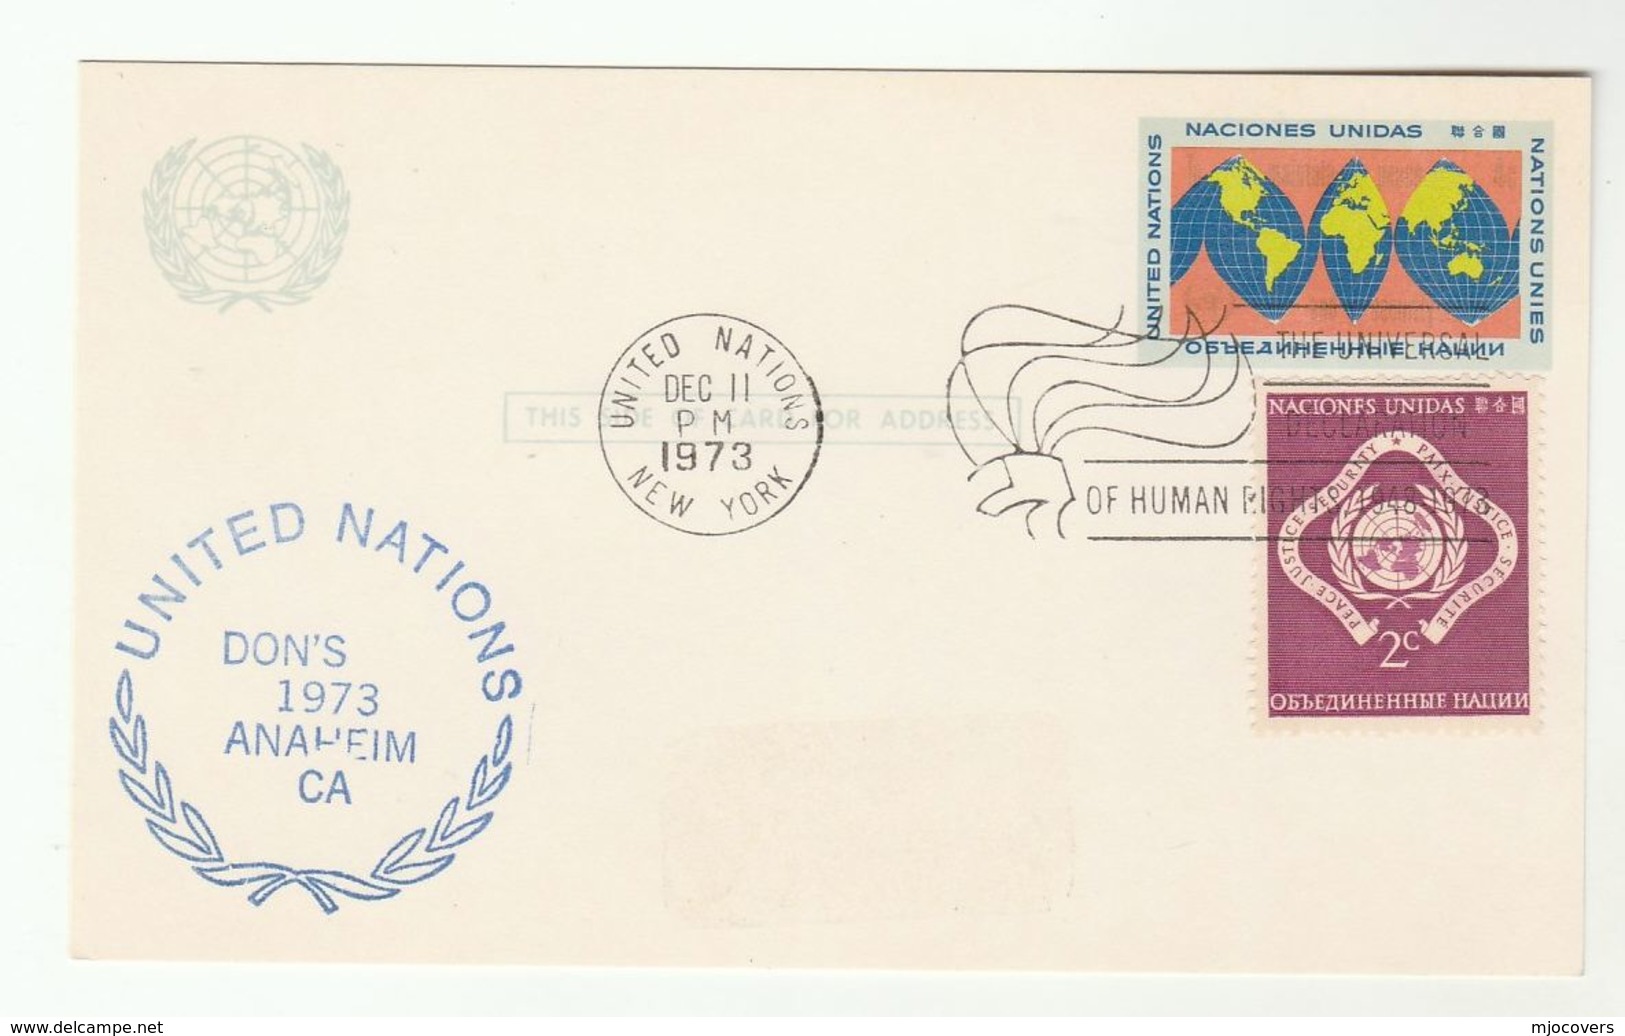 1973 UNITED NATIONS DONS ANAHEIM  Event COVER Card Uprated Postal STATIONERY CARD Stamps - Covers & Documents